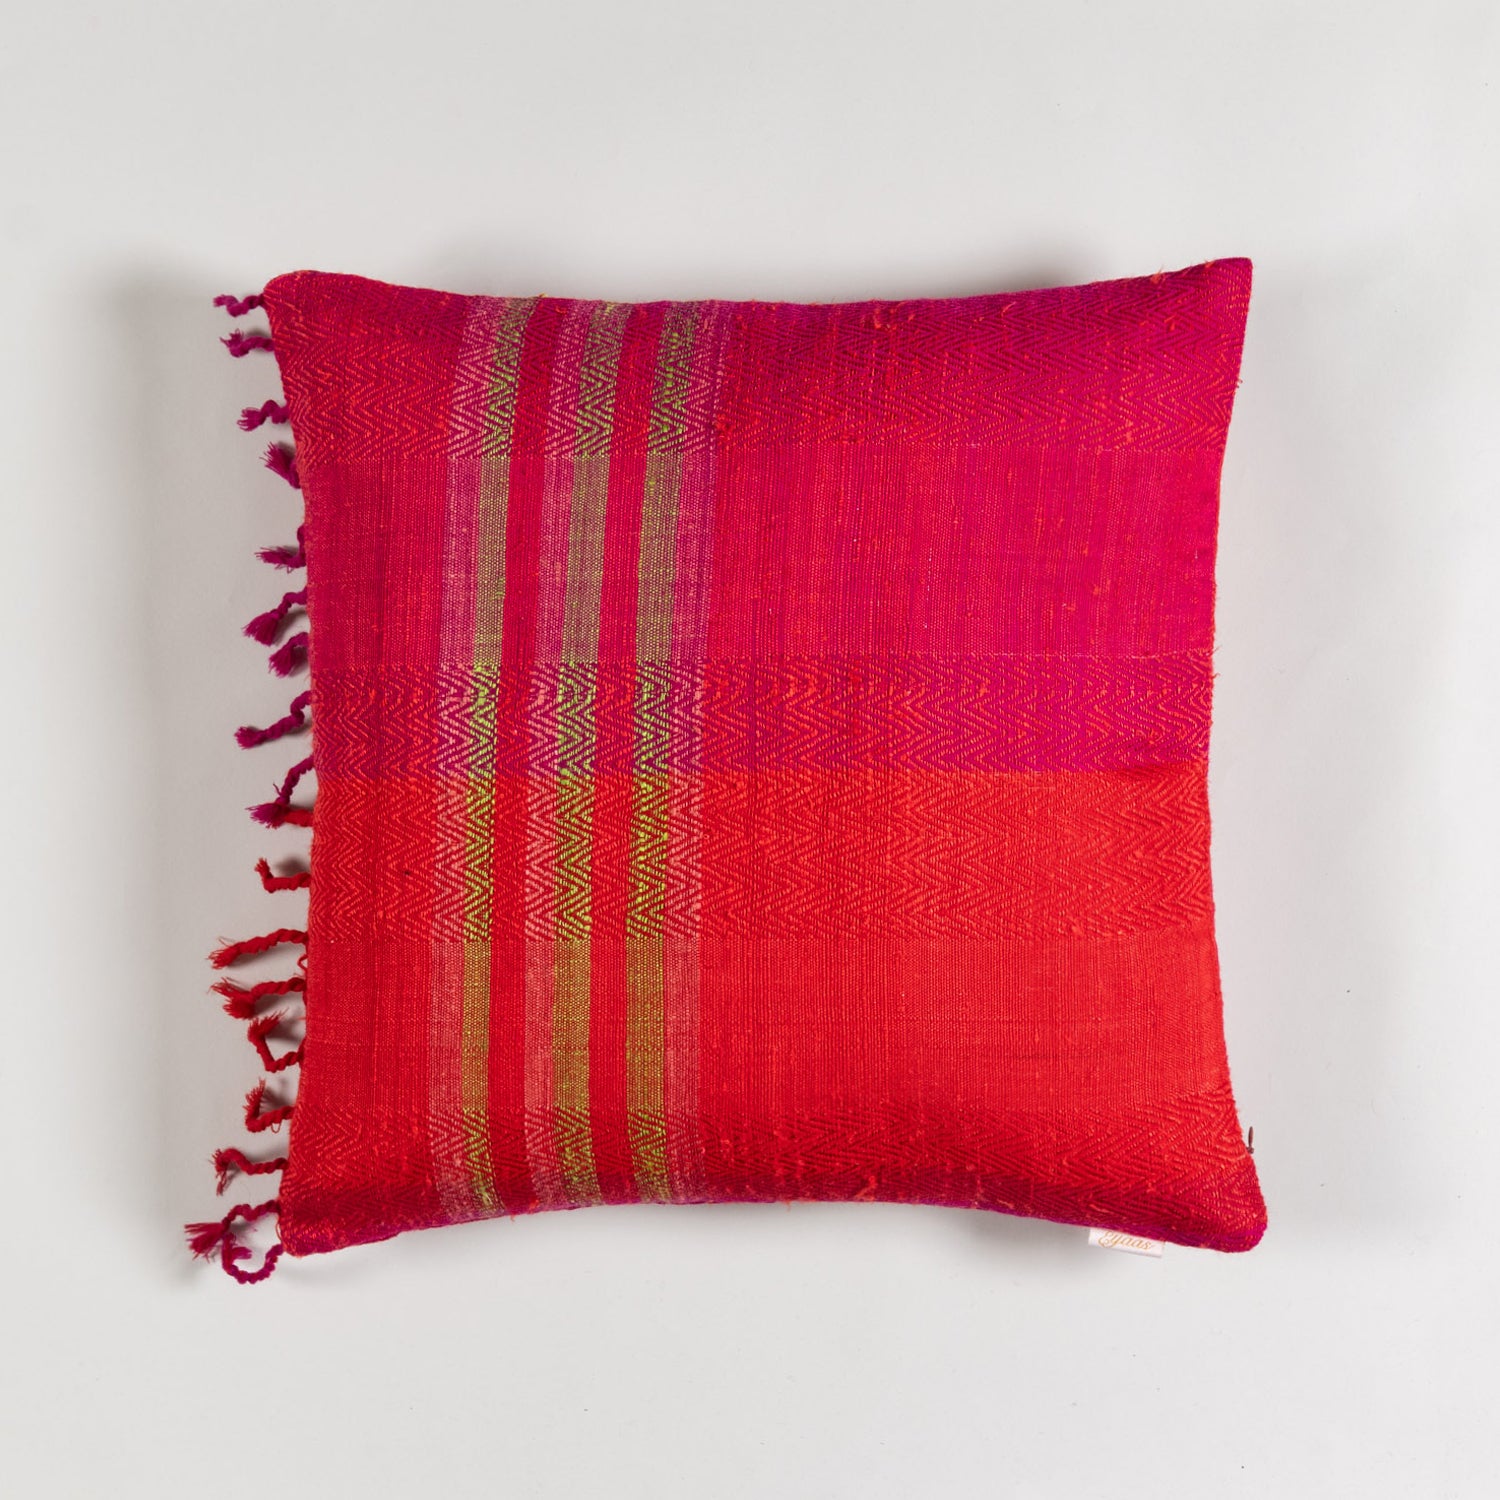 Handwoven Upcycled Red & Pink Wool & Oak Silk Cushion Cover - 18x18 2 Pcs